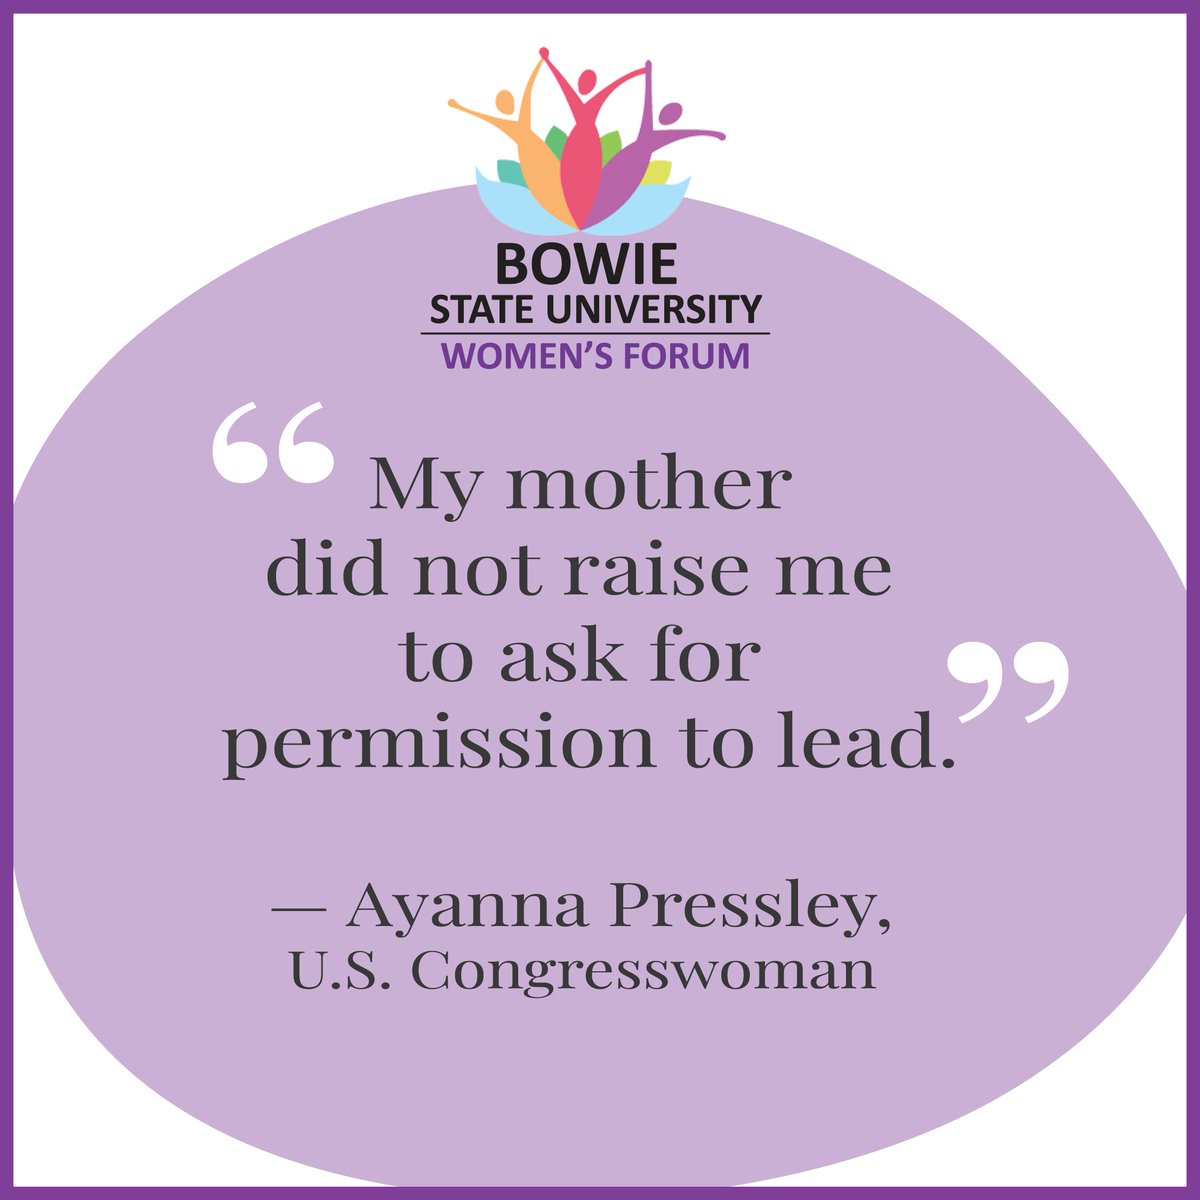 Reminder from the @BSUWomensForum to continue to be #BowieBold! We lead on our campuses with women empowerment, fearlessness, and Bulldog Pride! 🖤💛🐾

'My mother did not raise me to ask for permission to lead.' -@RepPressley